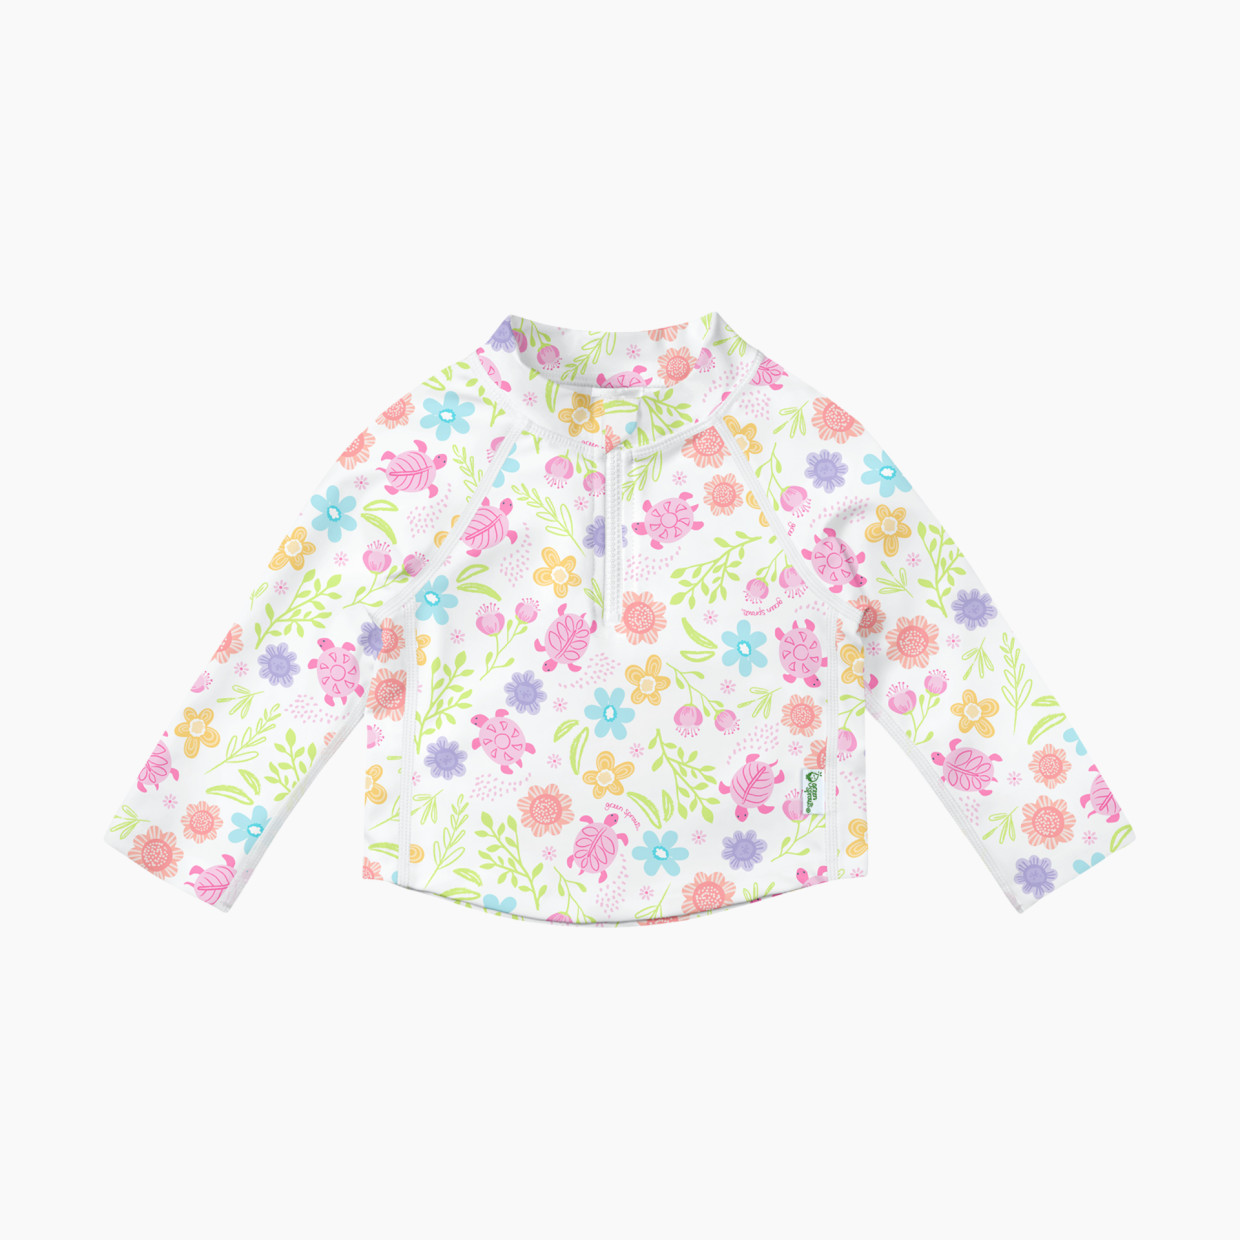 GREEN SPROUTS Long Sleeve Zip Rashguard Shirt - White Turtle Floral, 6 Months.